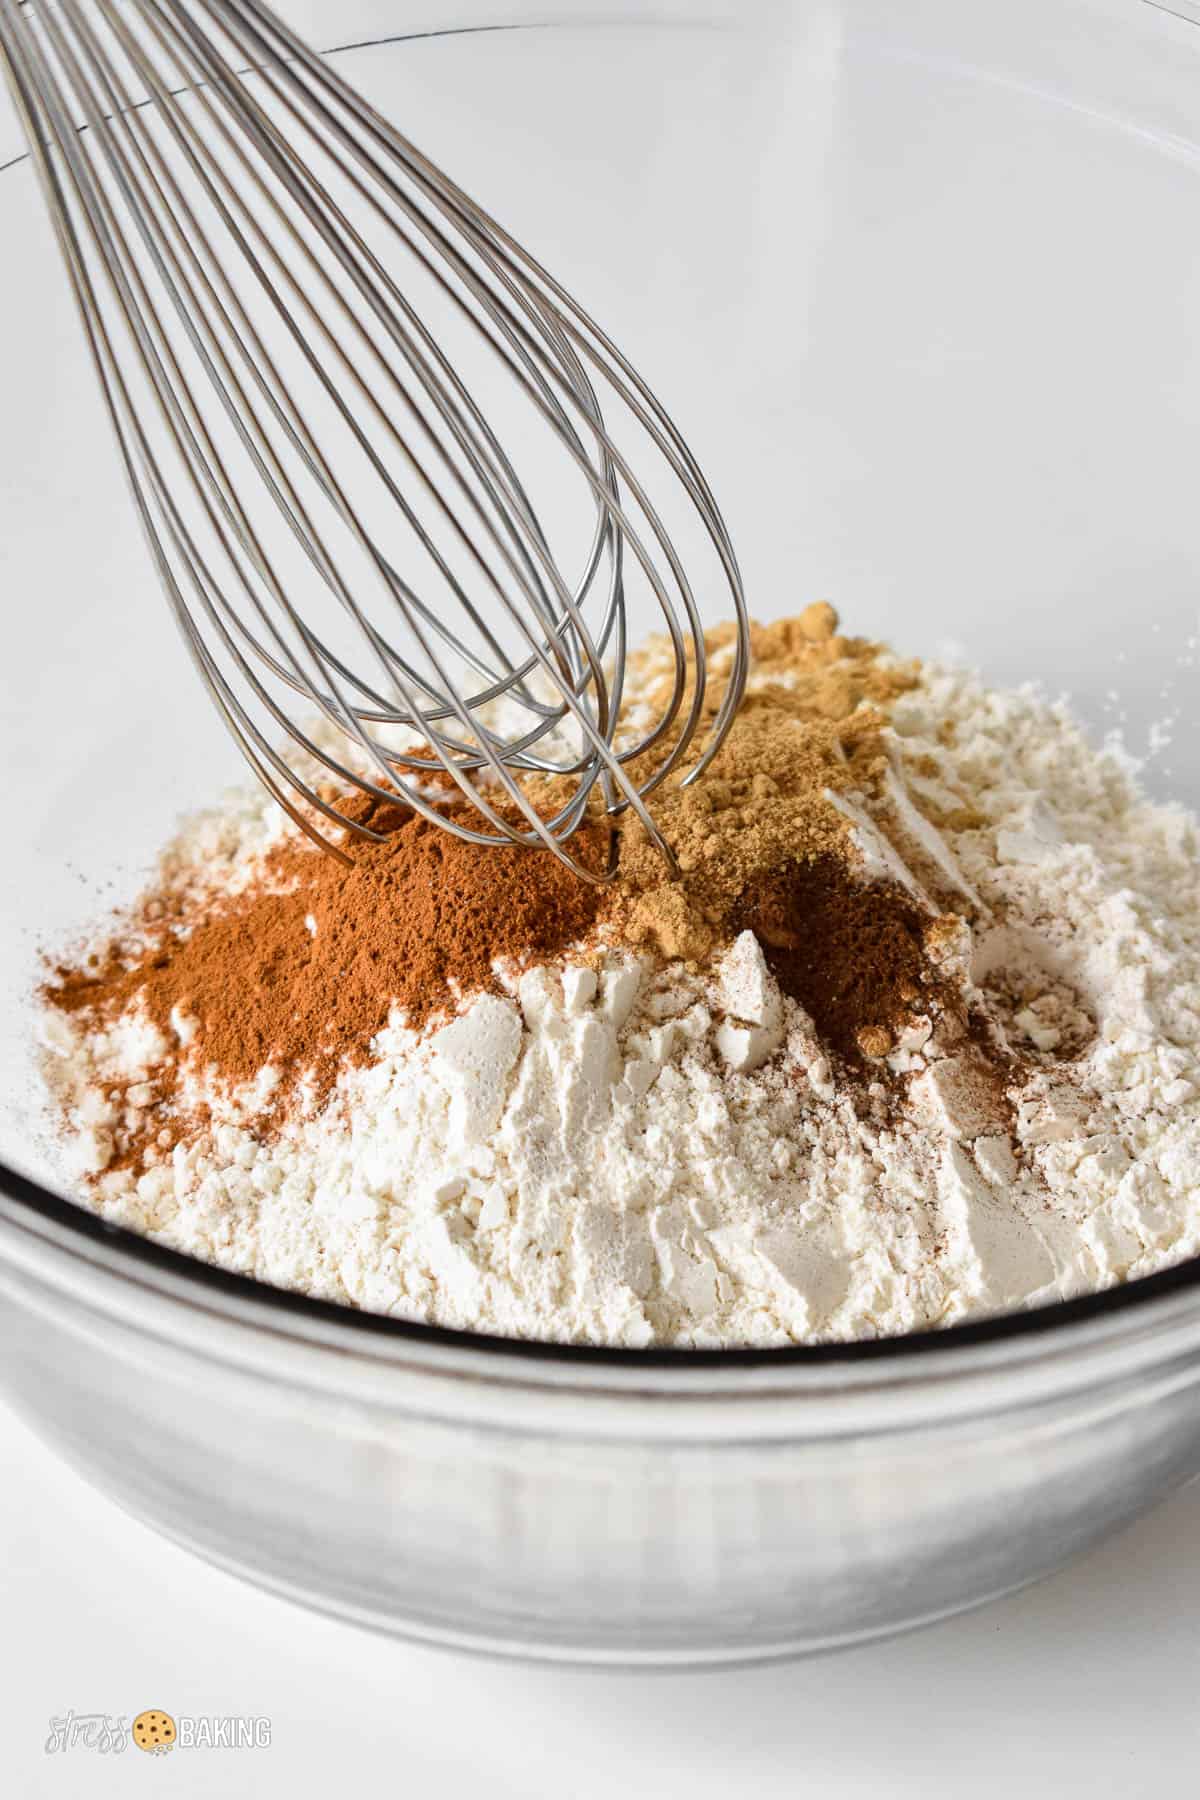 Dry flour mixture in a clear mixing bowl